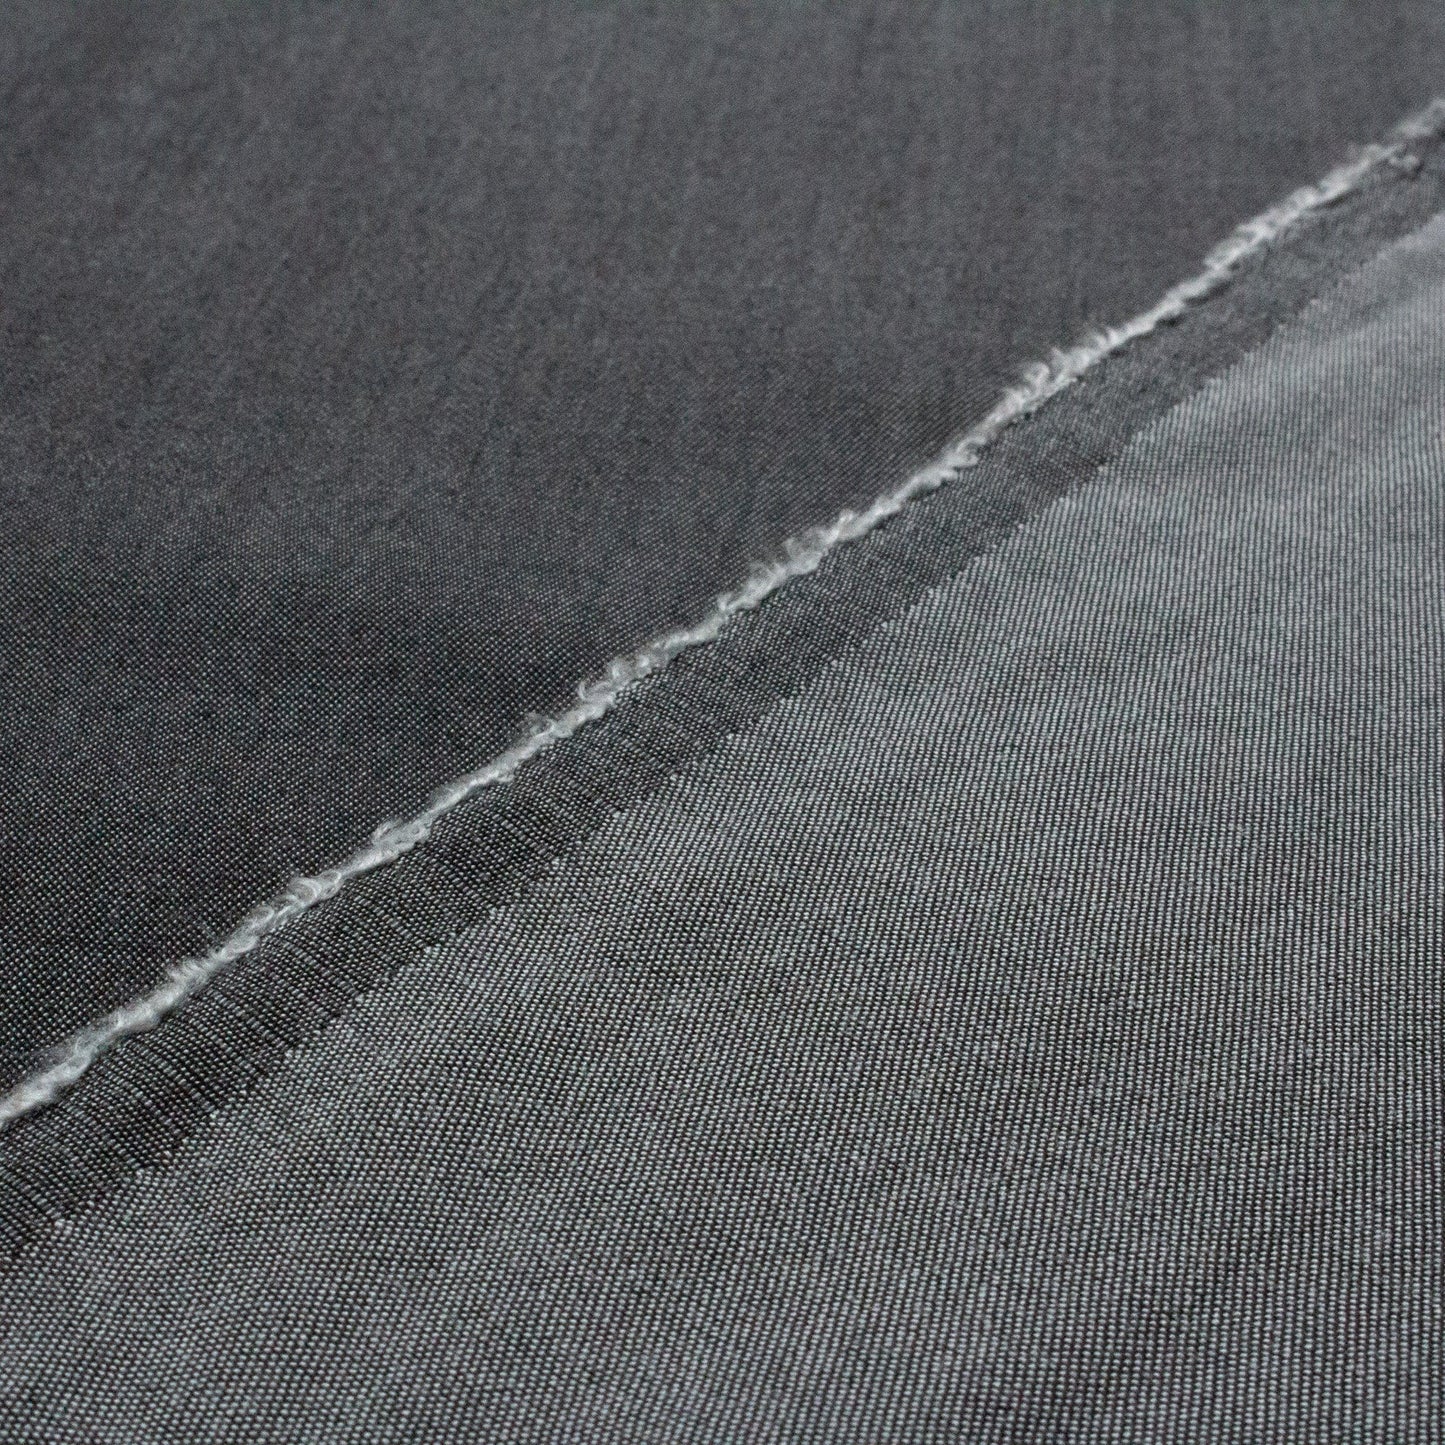 90cm Piece Tencel Chambray in Anthracite Grey